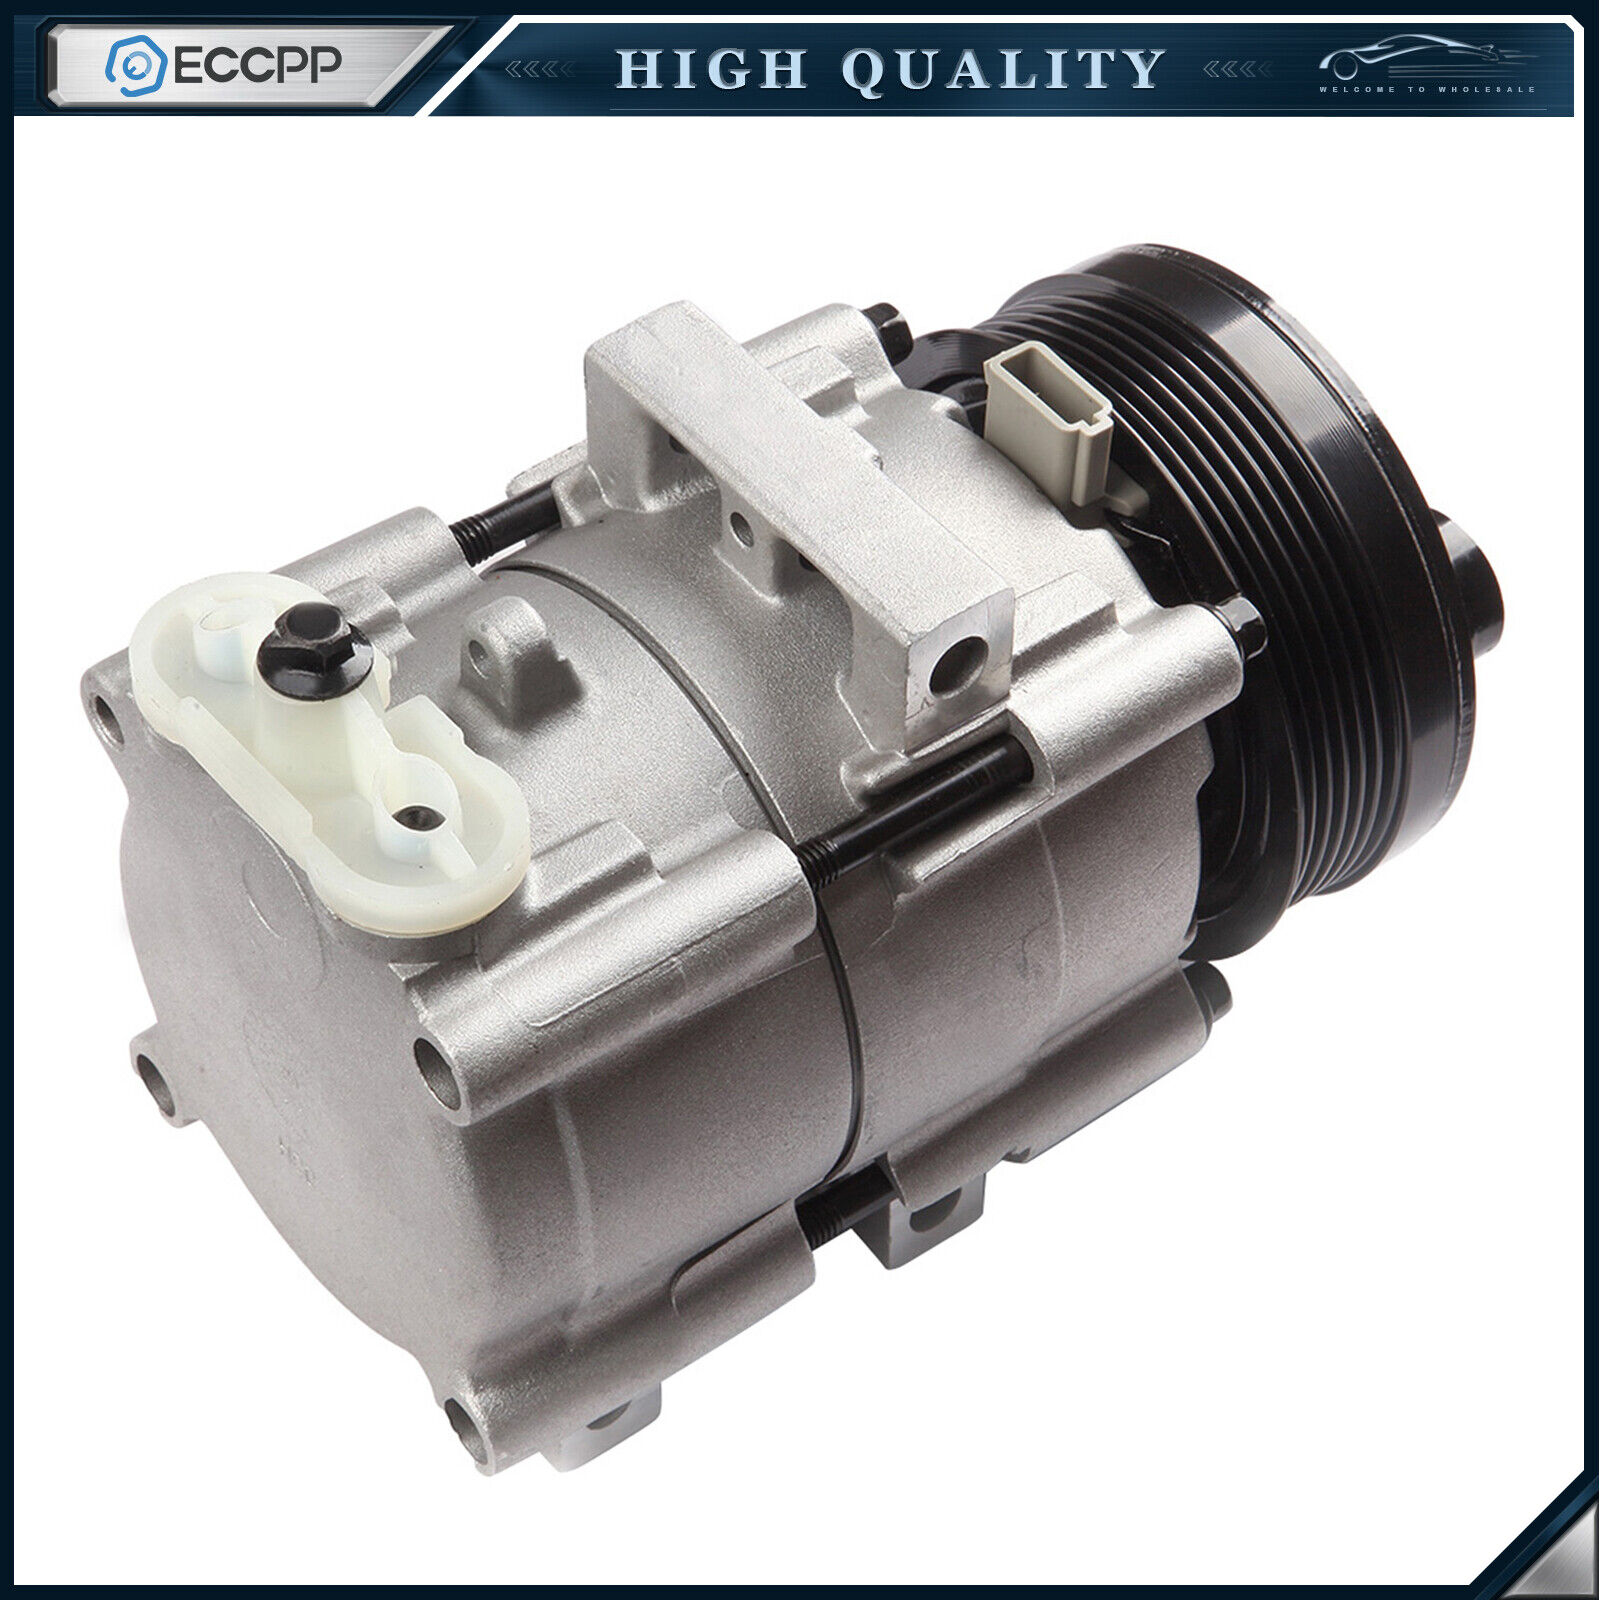 ECCPP A/C AC Compressor For 04-06 Ford F150 96-06 Ford Mustang Mercury